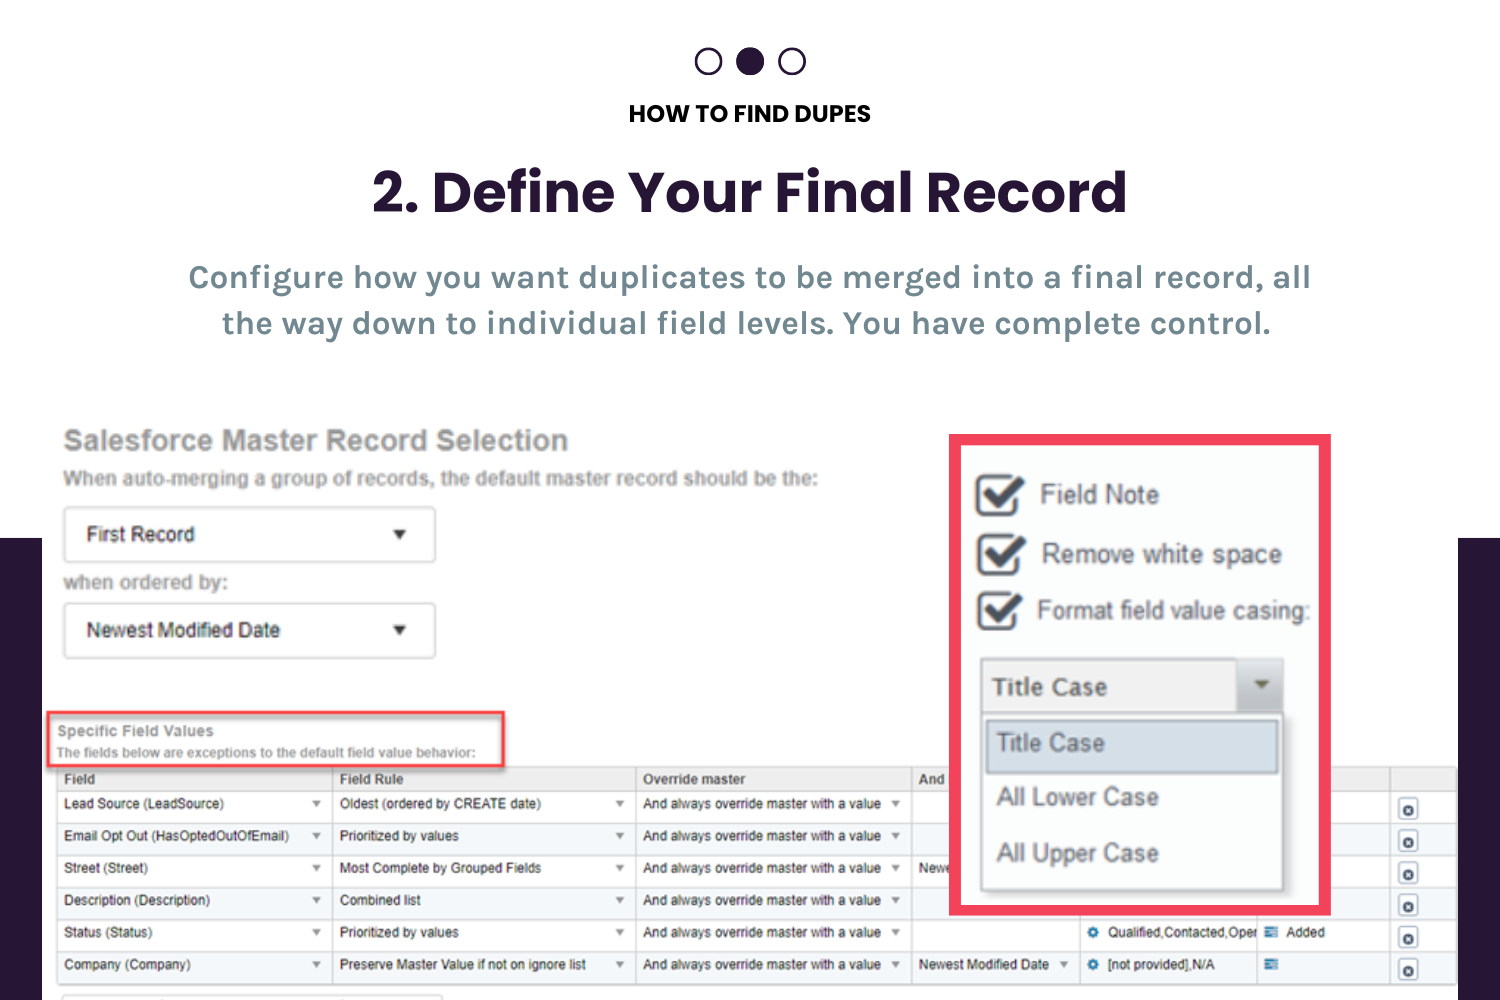 Step 2 to Deduping: Define Your Final Record